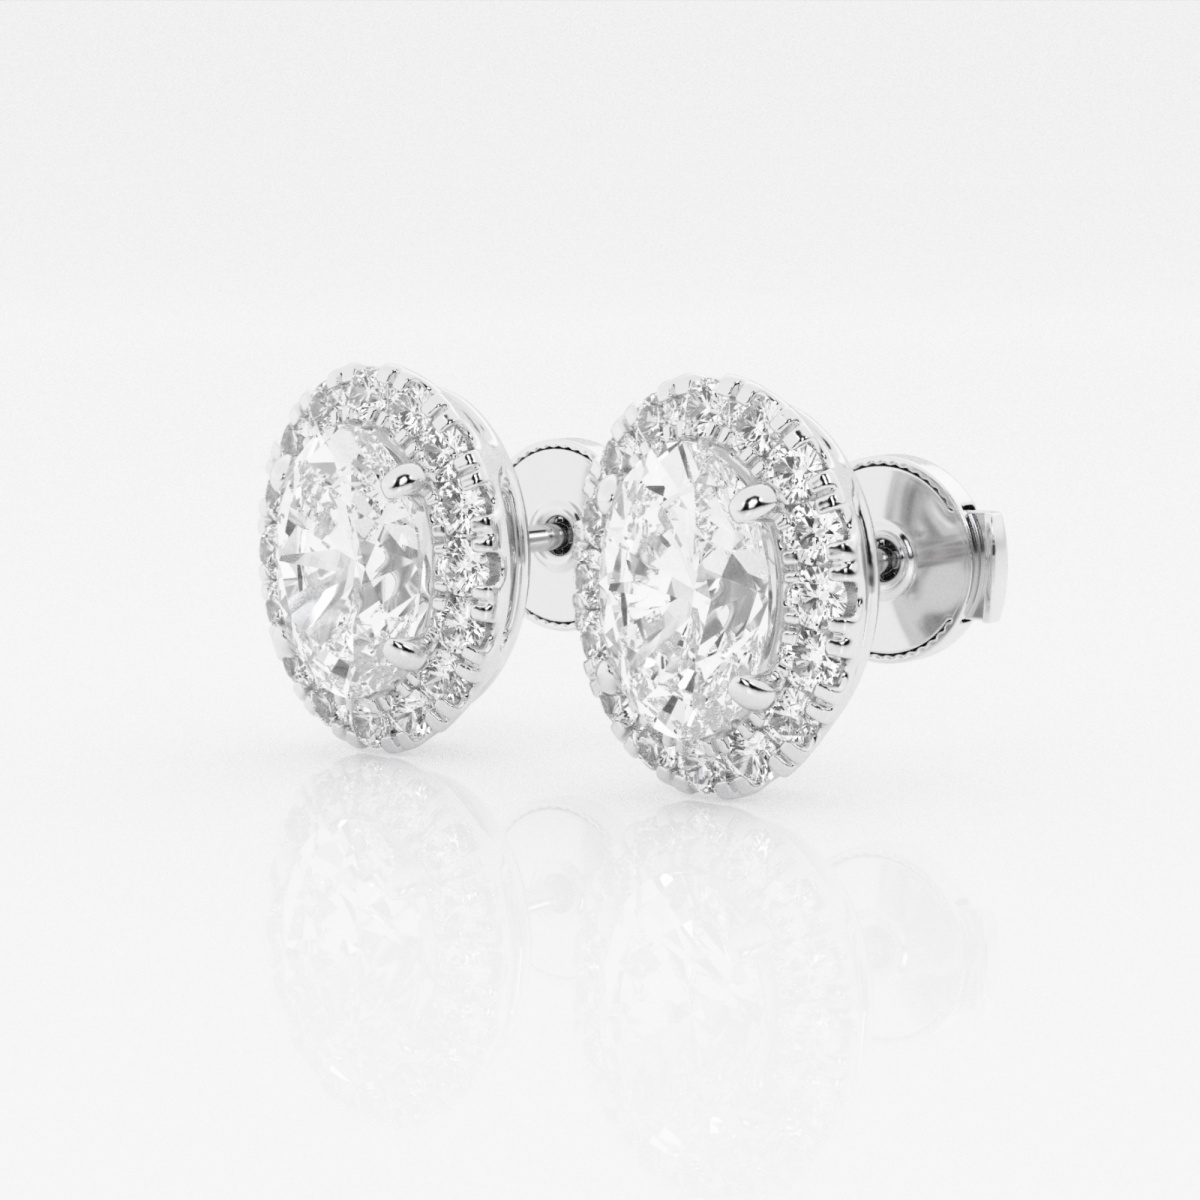 Additional Image 1 for  2 3/8 ctw Oval Lab Grown Diamond Halo Certified Stud Earrings